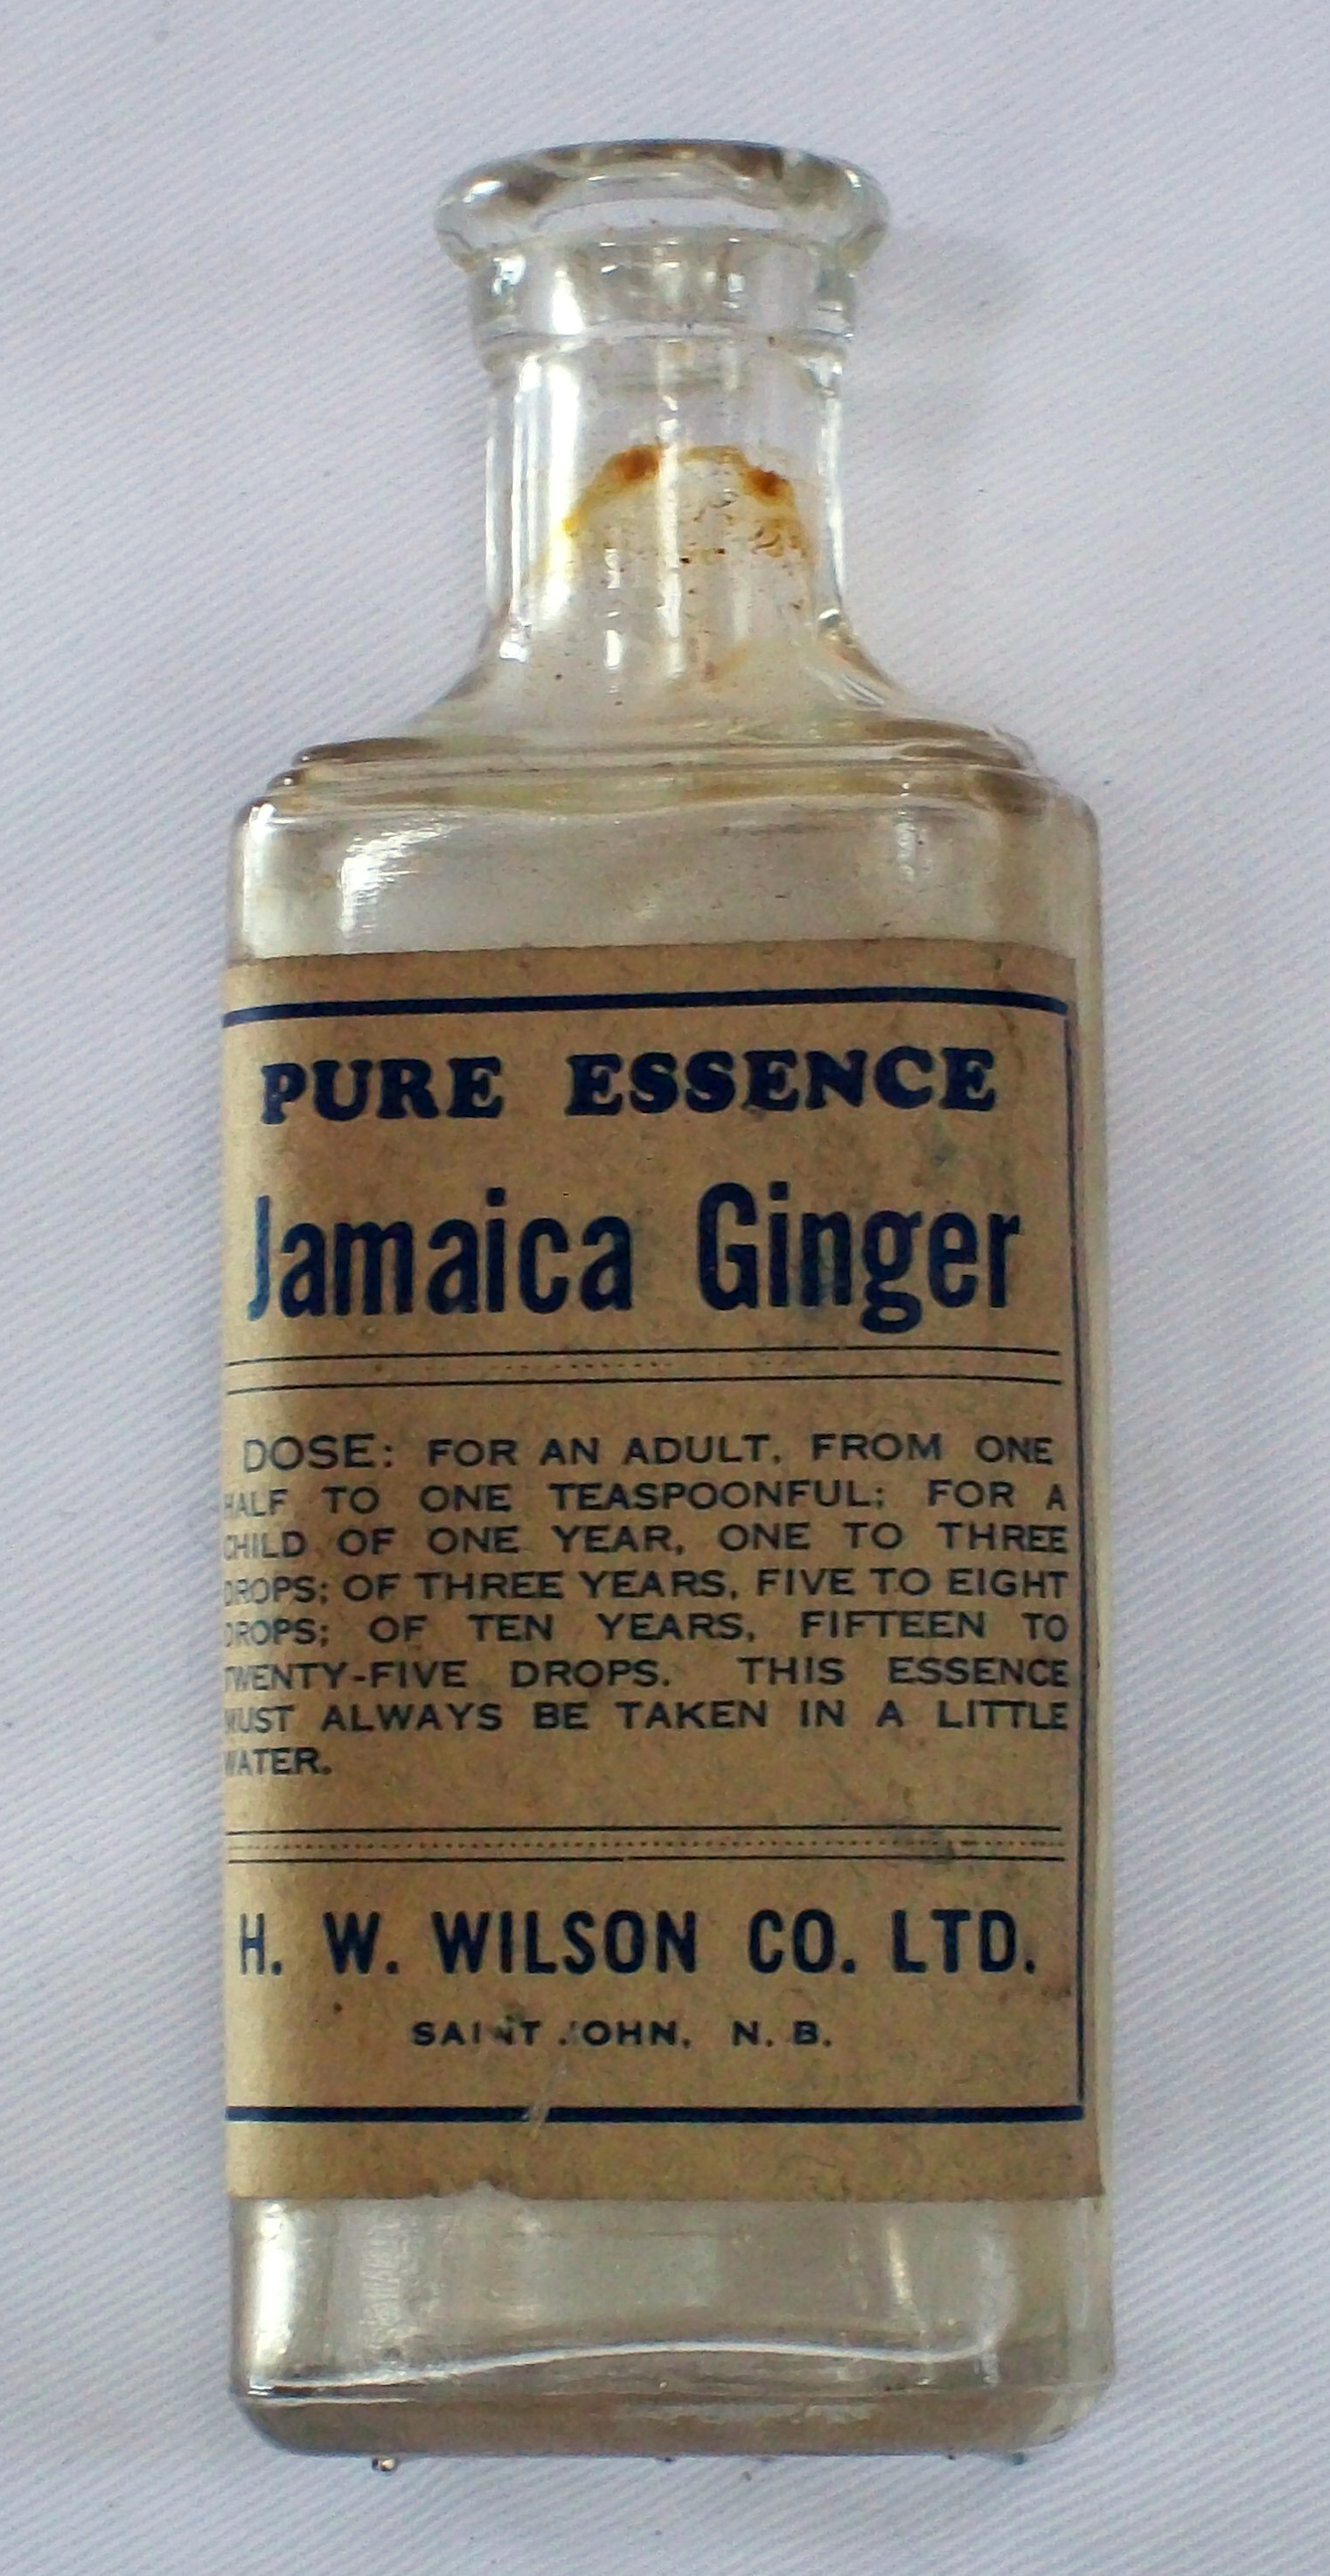 A glass bottle with browned-paper label saying: Pure essence Jamaica Ginger. Recommended dose and manufacturer's details written below.